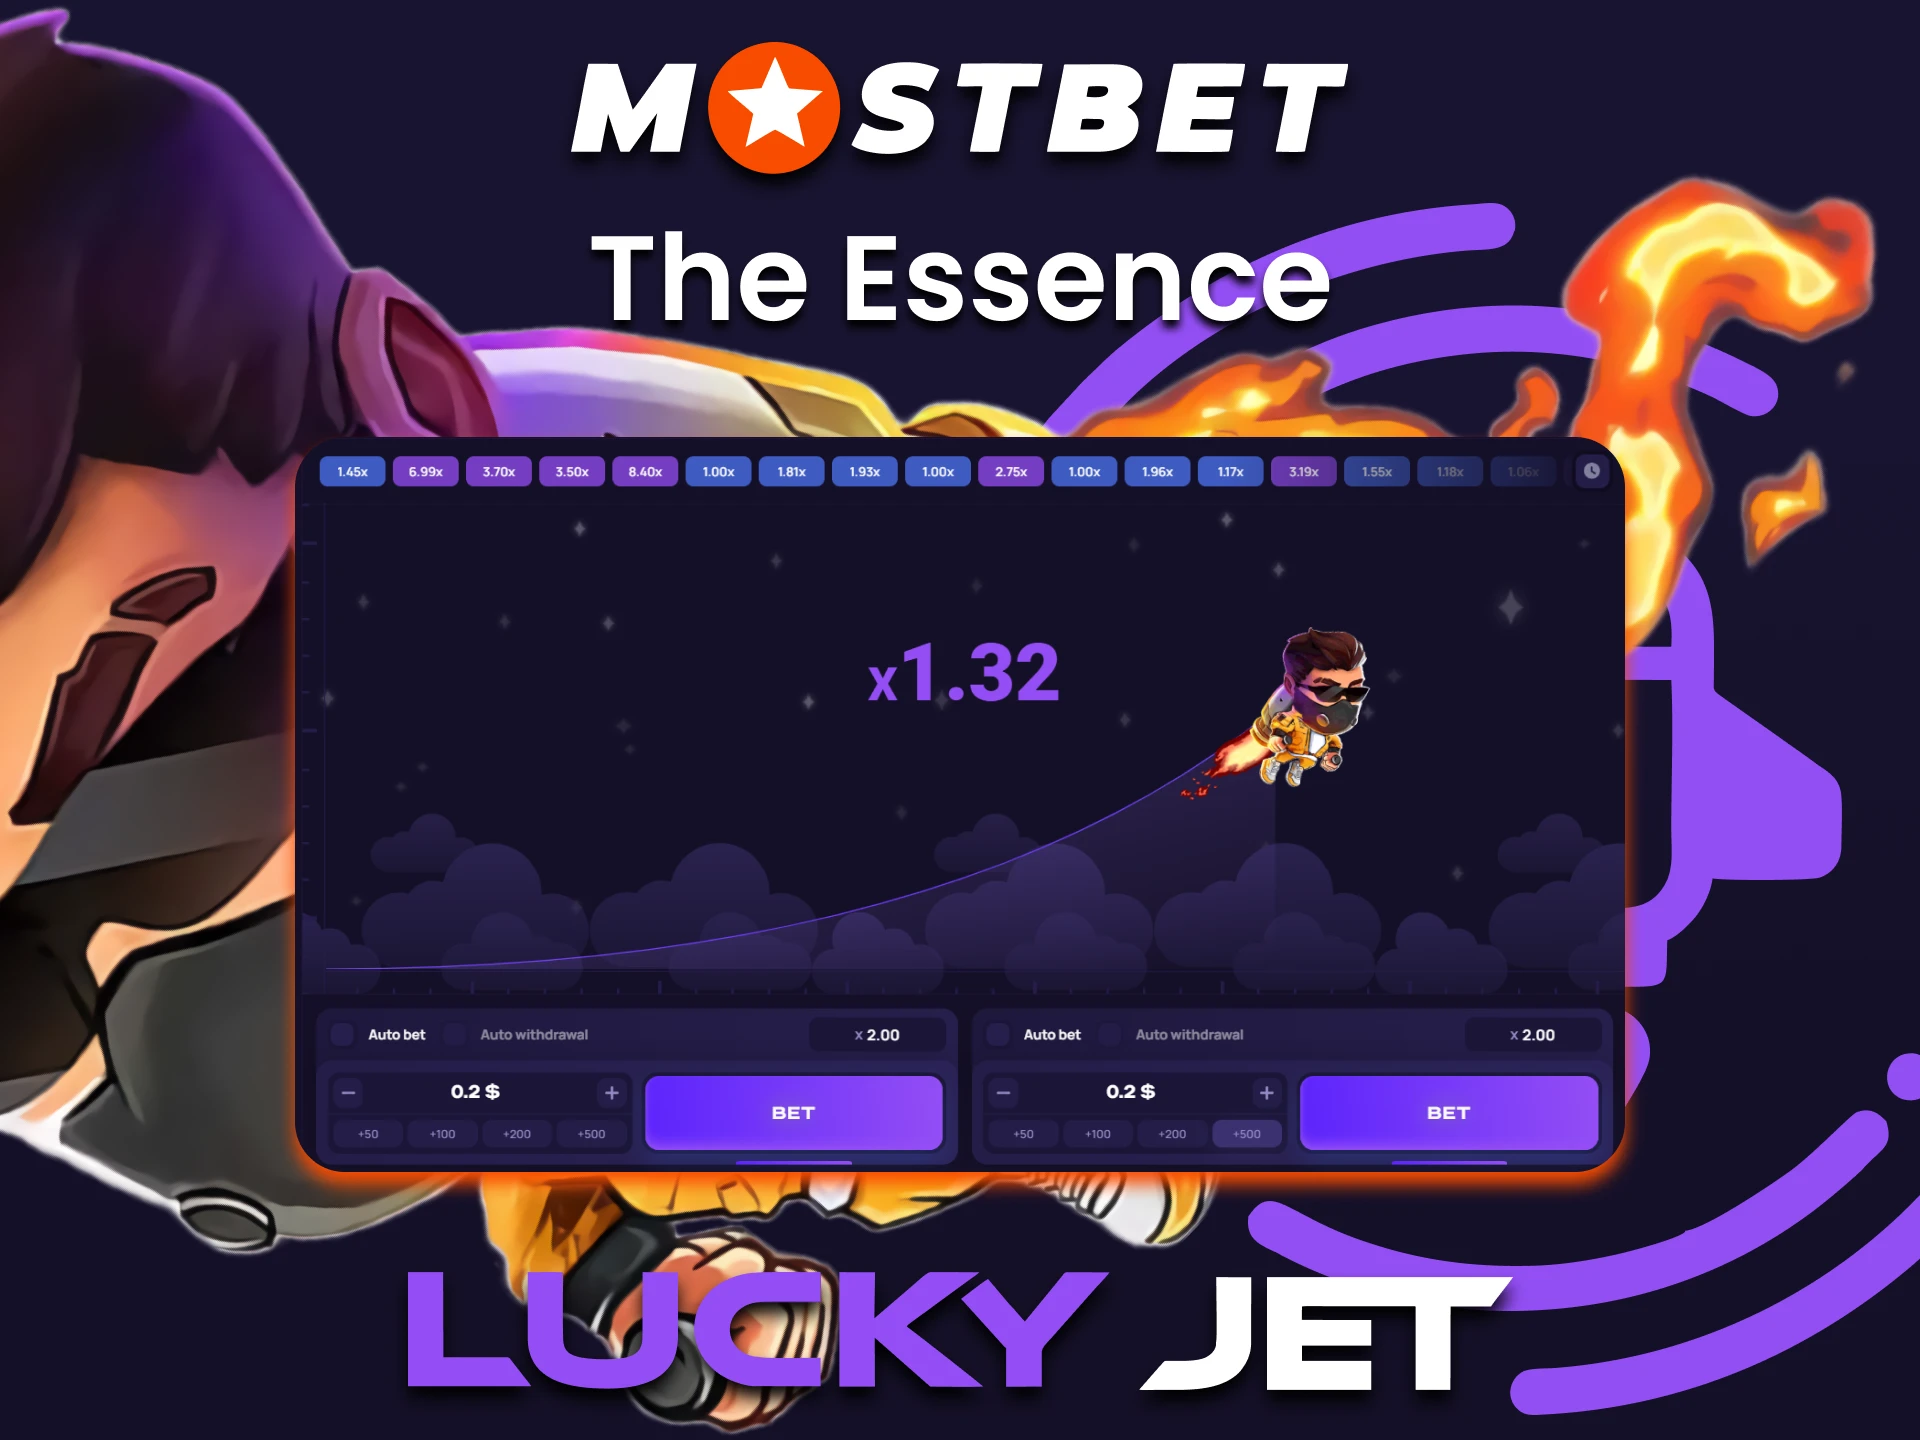 Learn how to play Lucky Jet correctly with Mostbet.